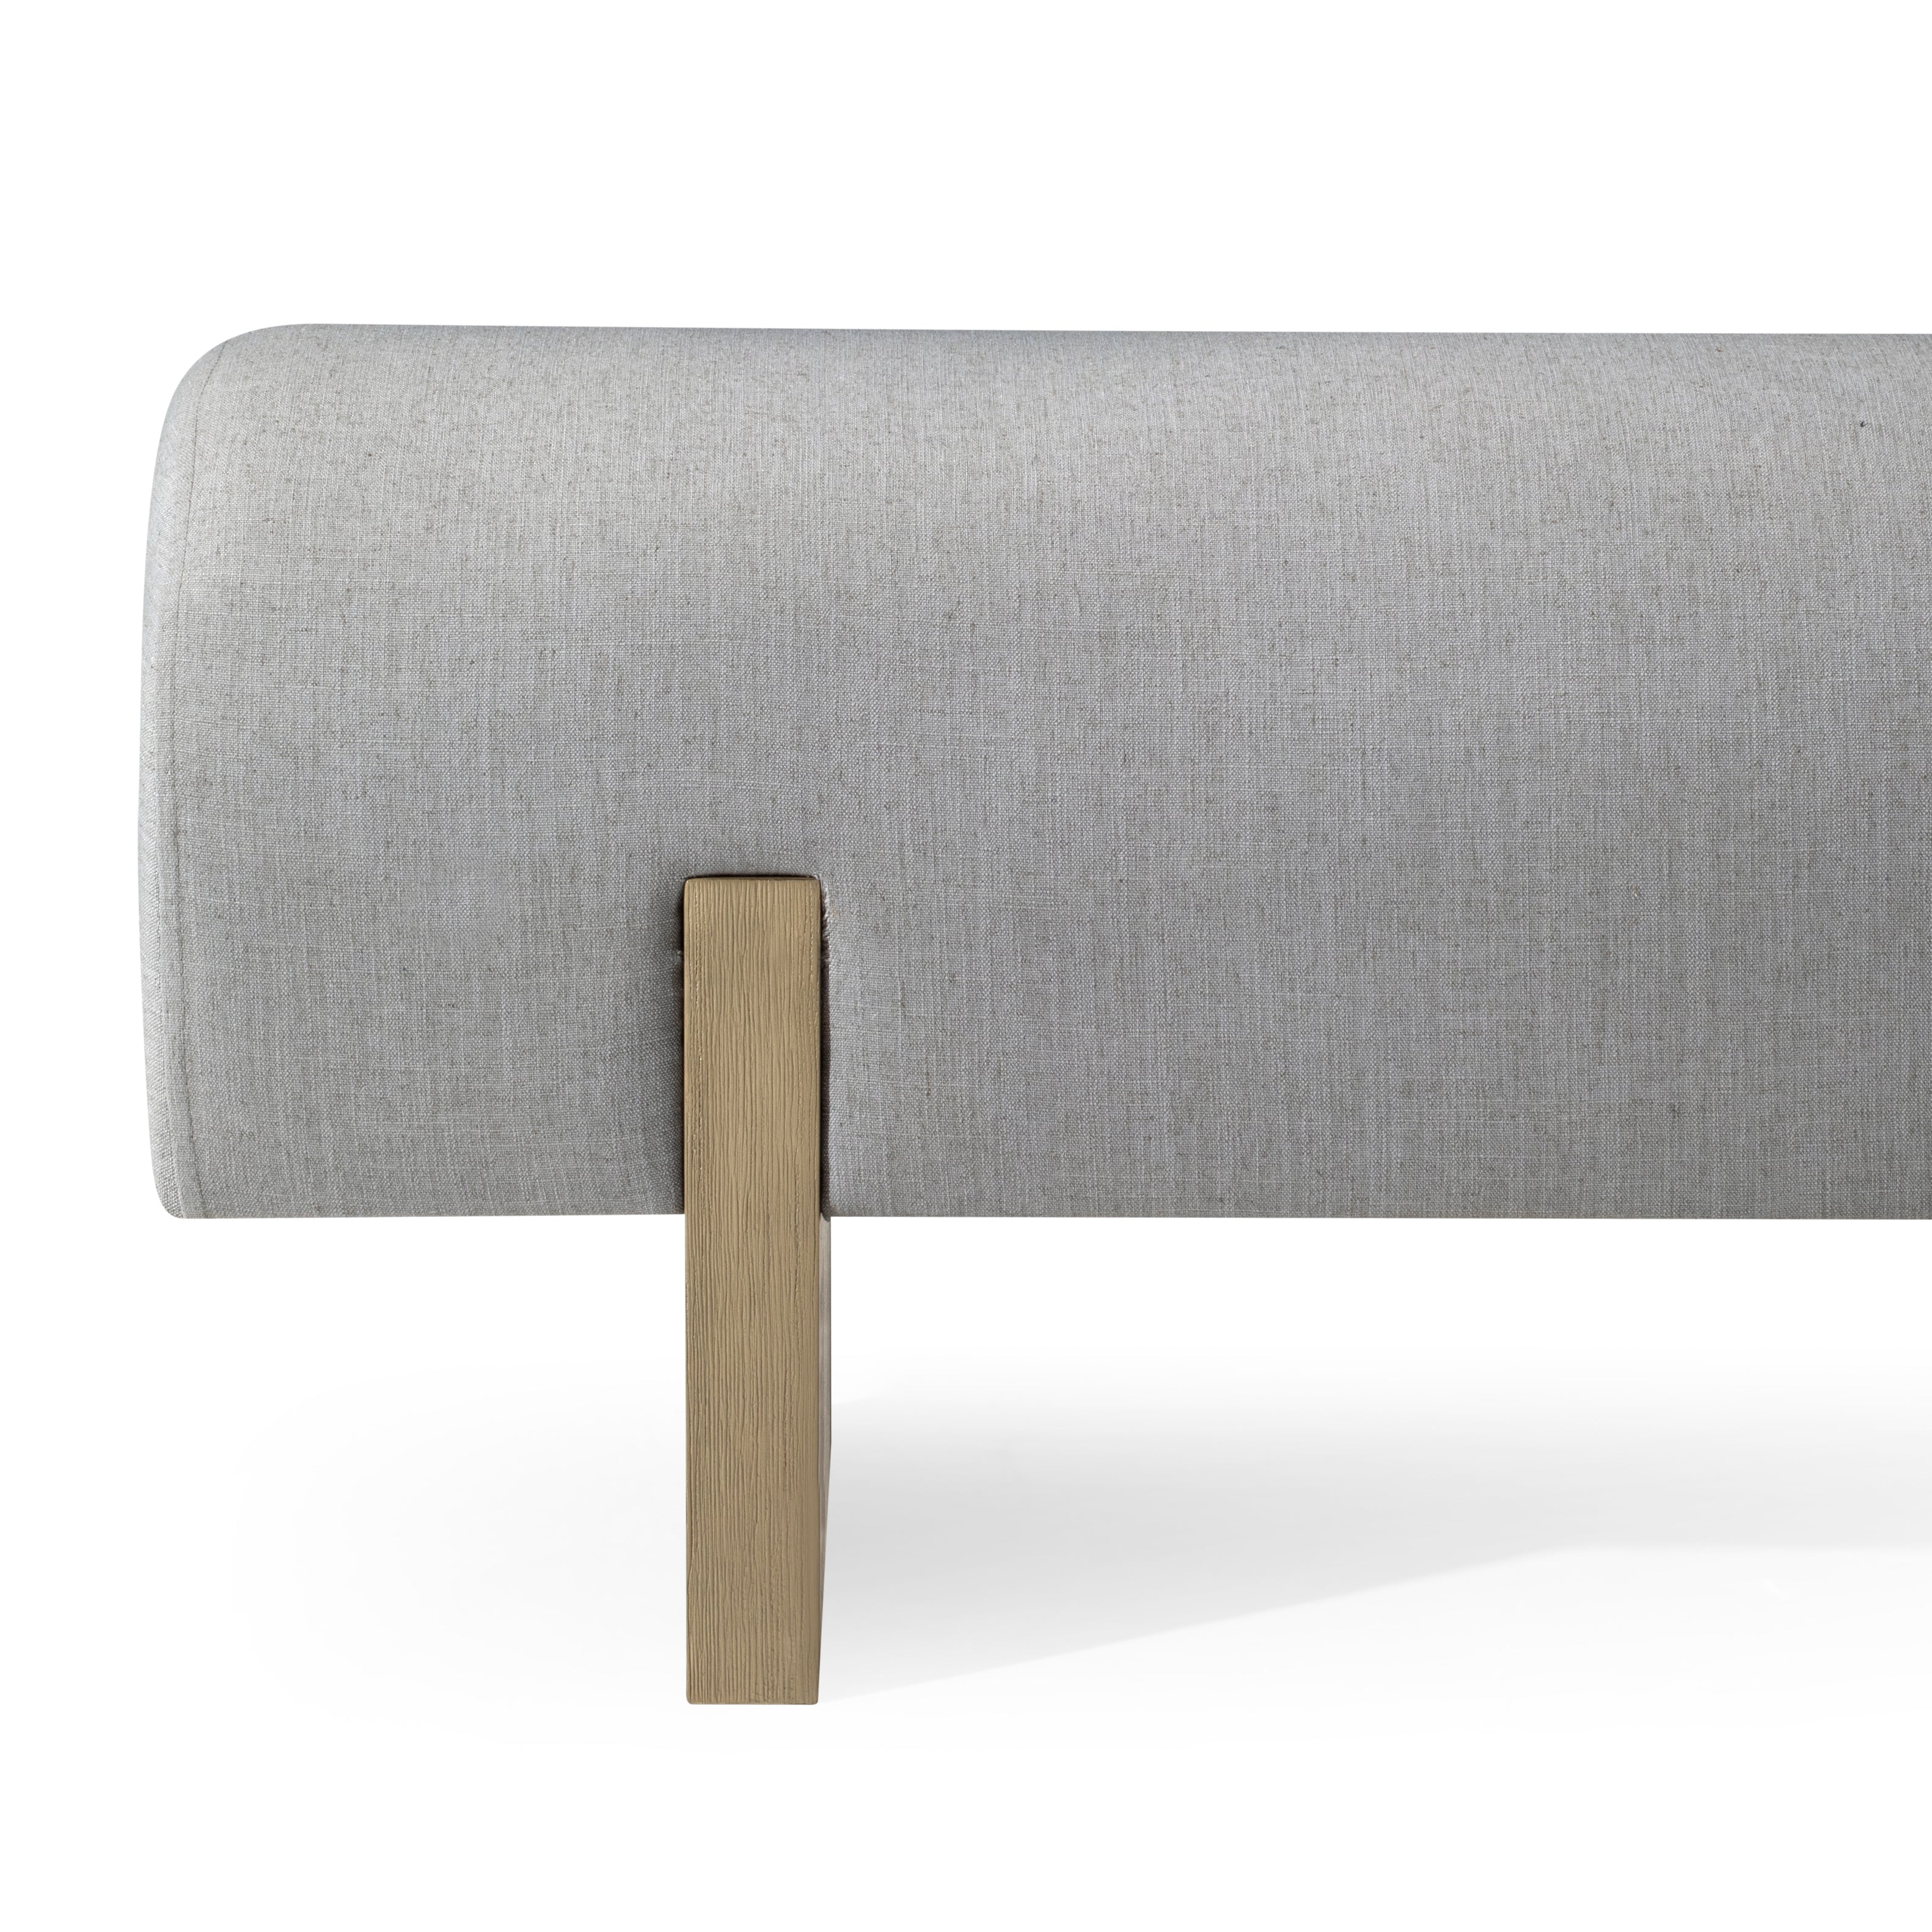 Juno Contemporary Upholstered Wooden Bench in Refined Grey Finish in Ottomans & Benches by Maven Lane